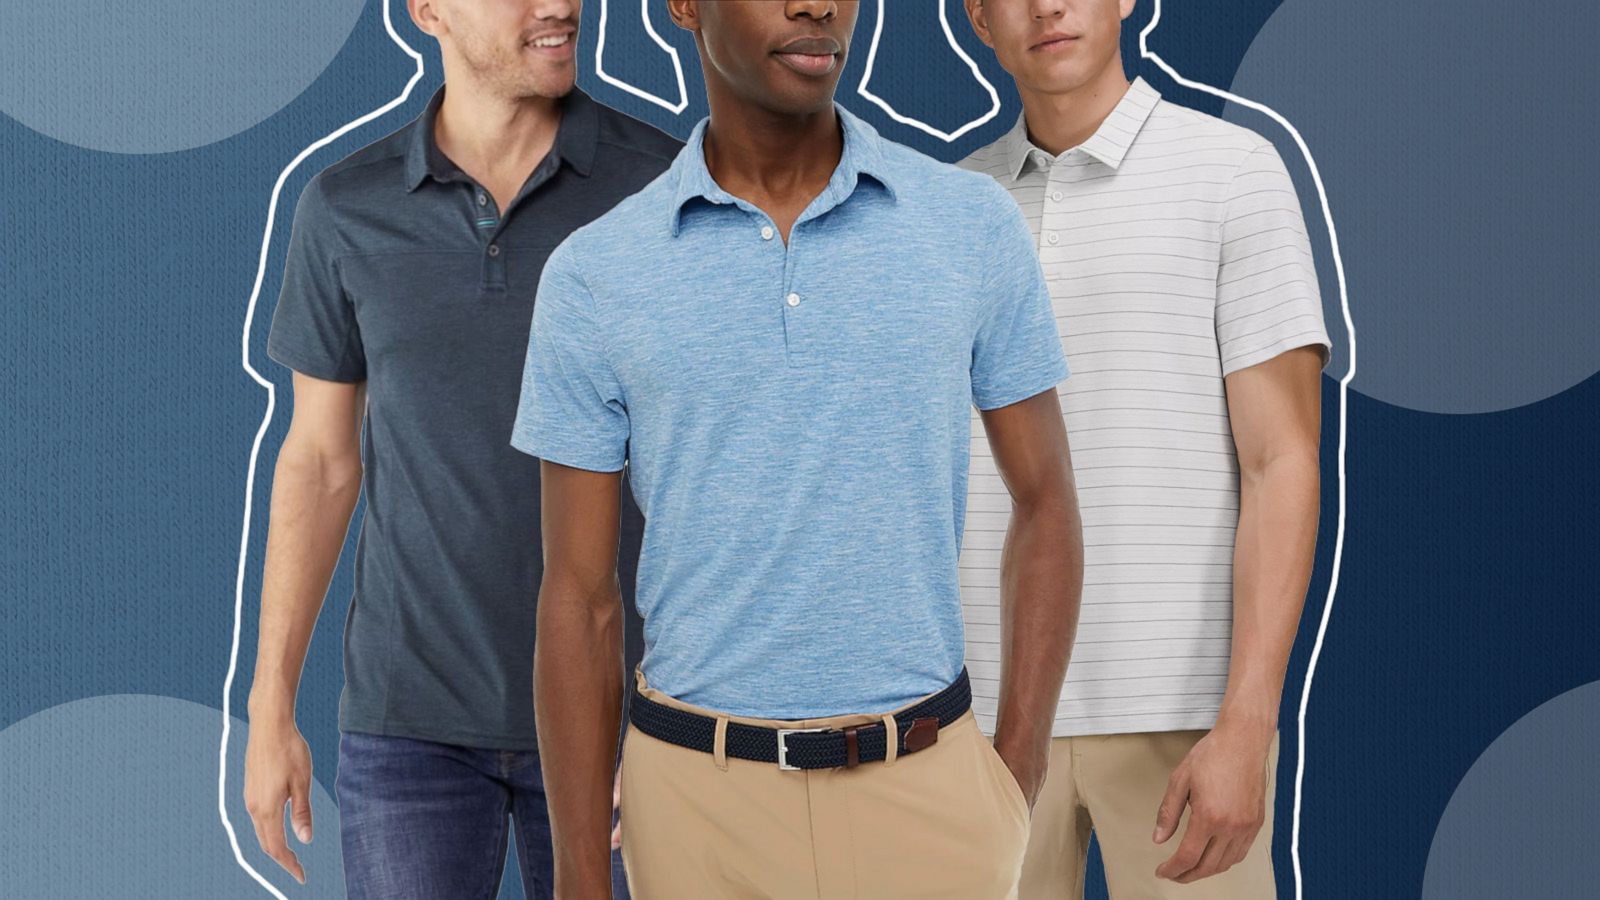 Shop men's polo shirts for summer: Moisture-wicking, for the